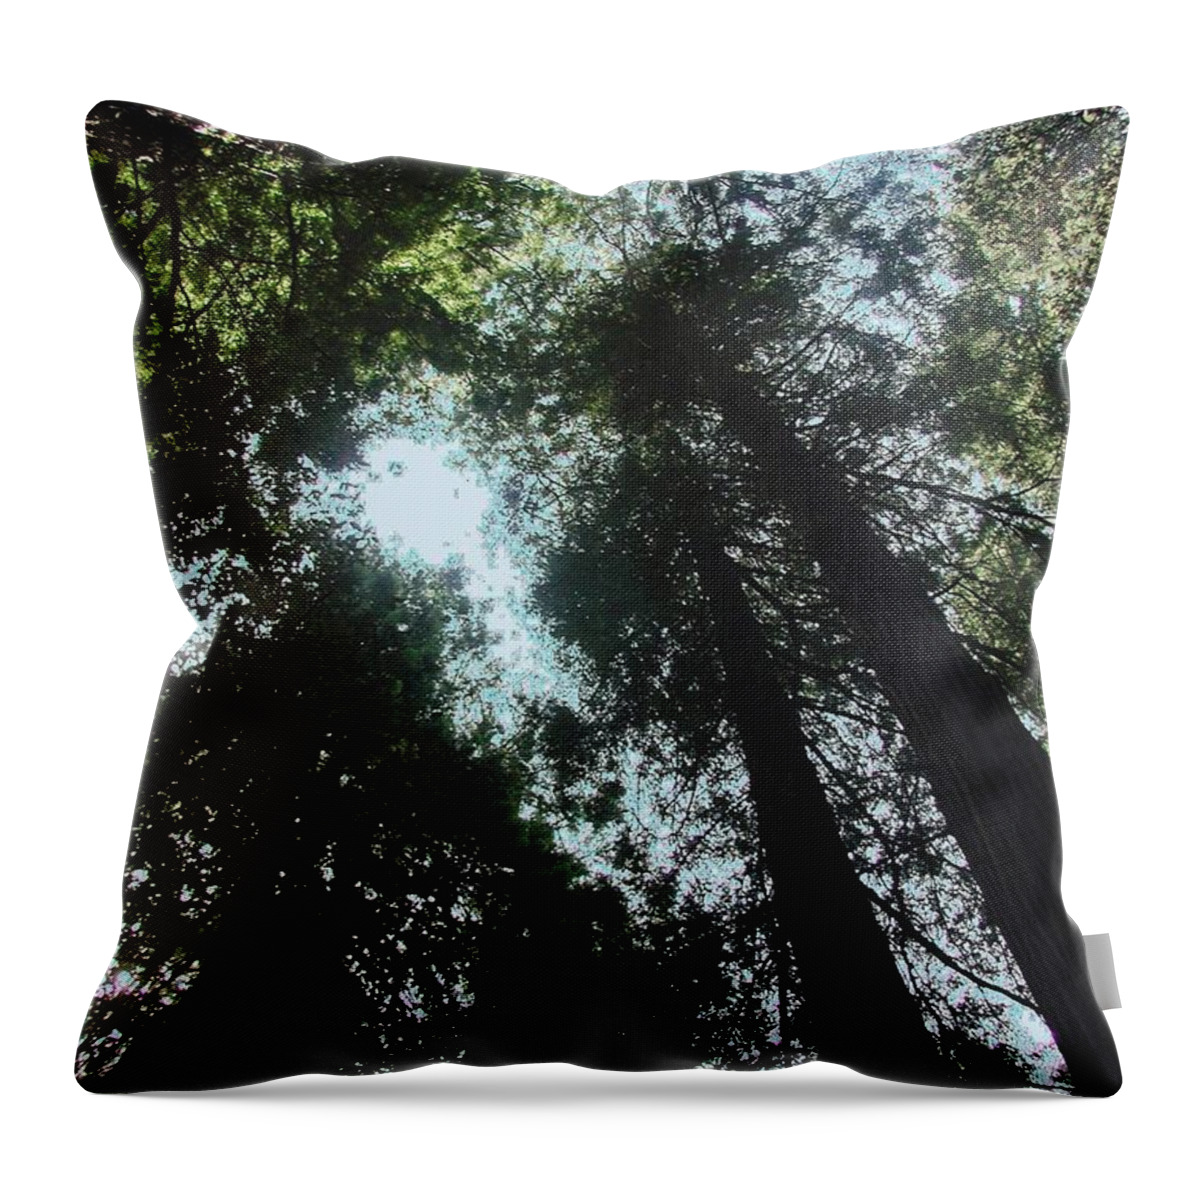 California Throw Pillow featuring the photograph Redwoods by Steve Ondrus